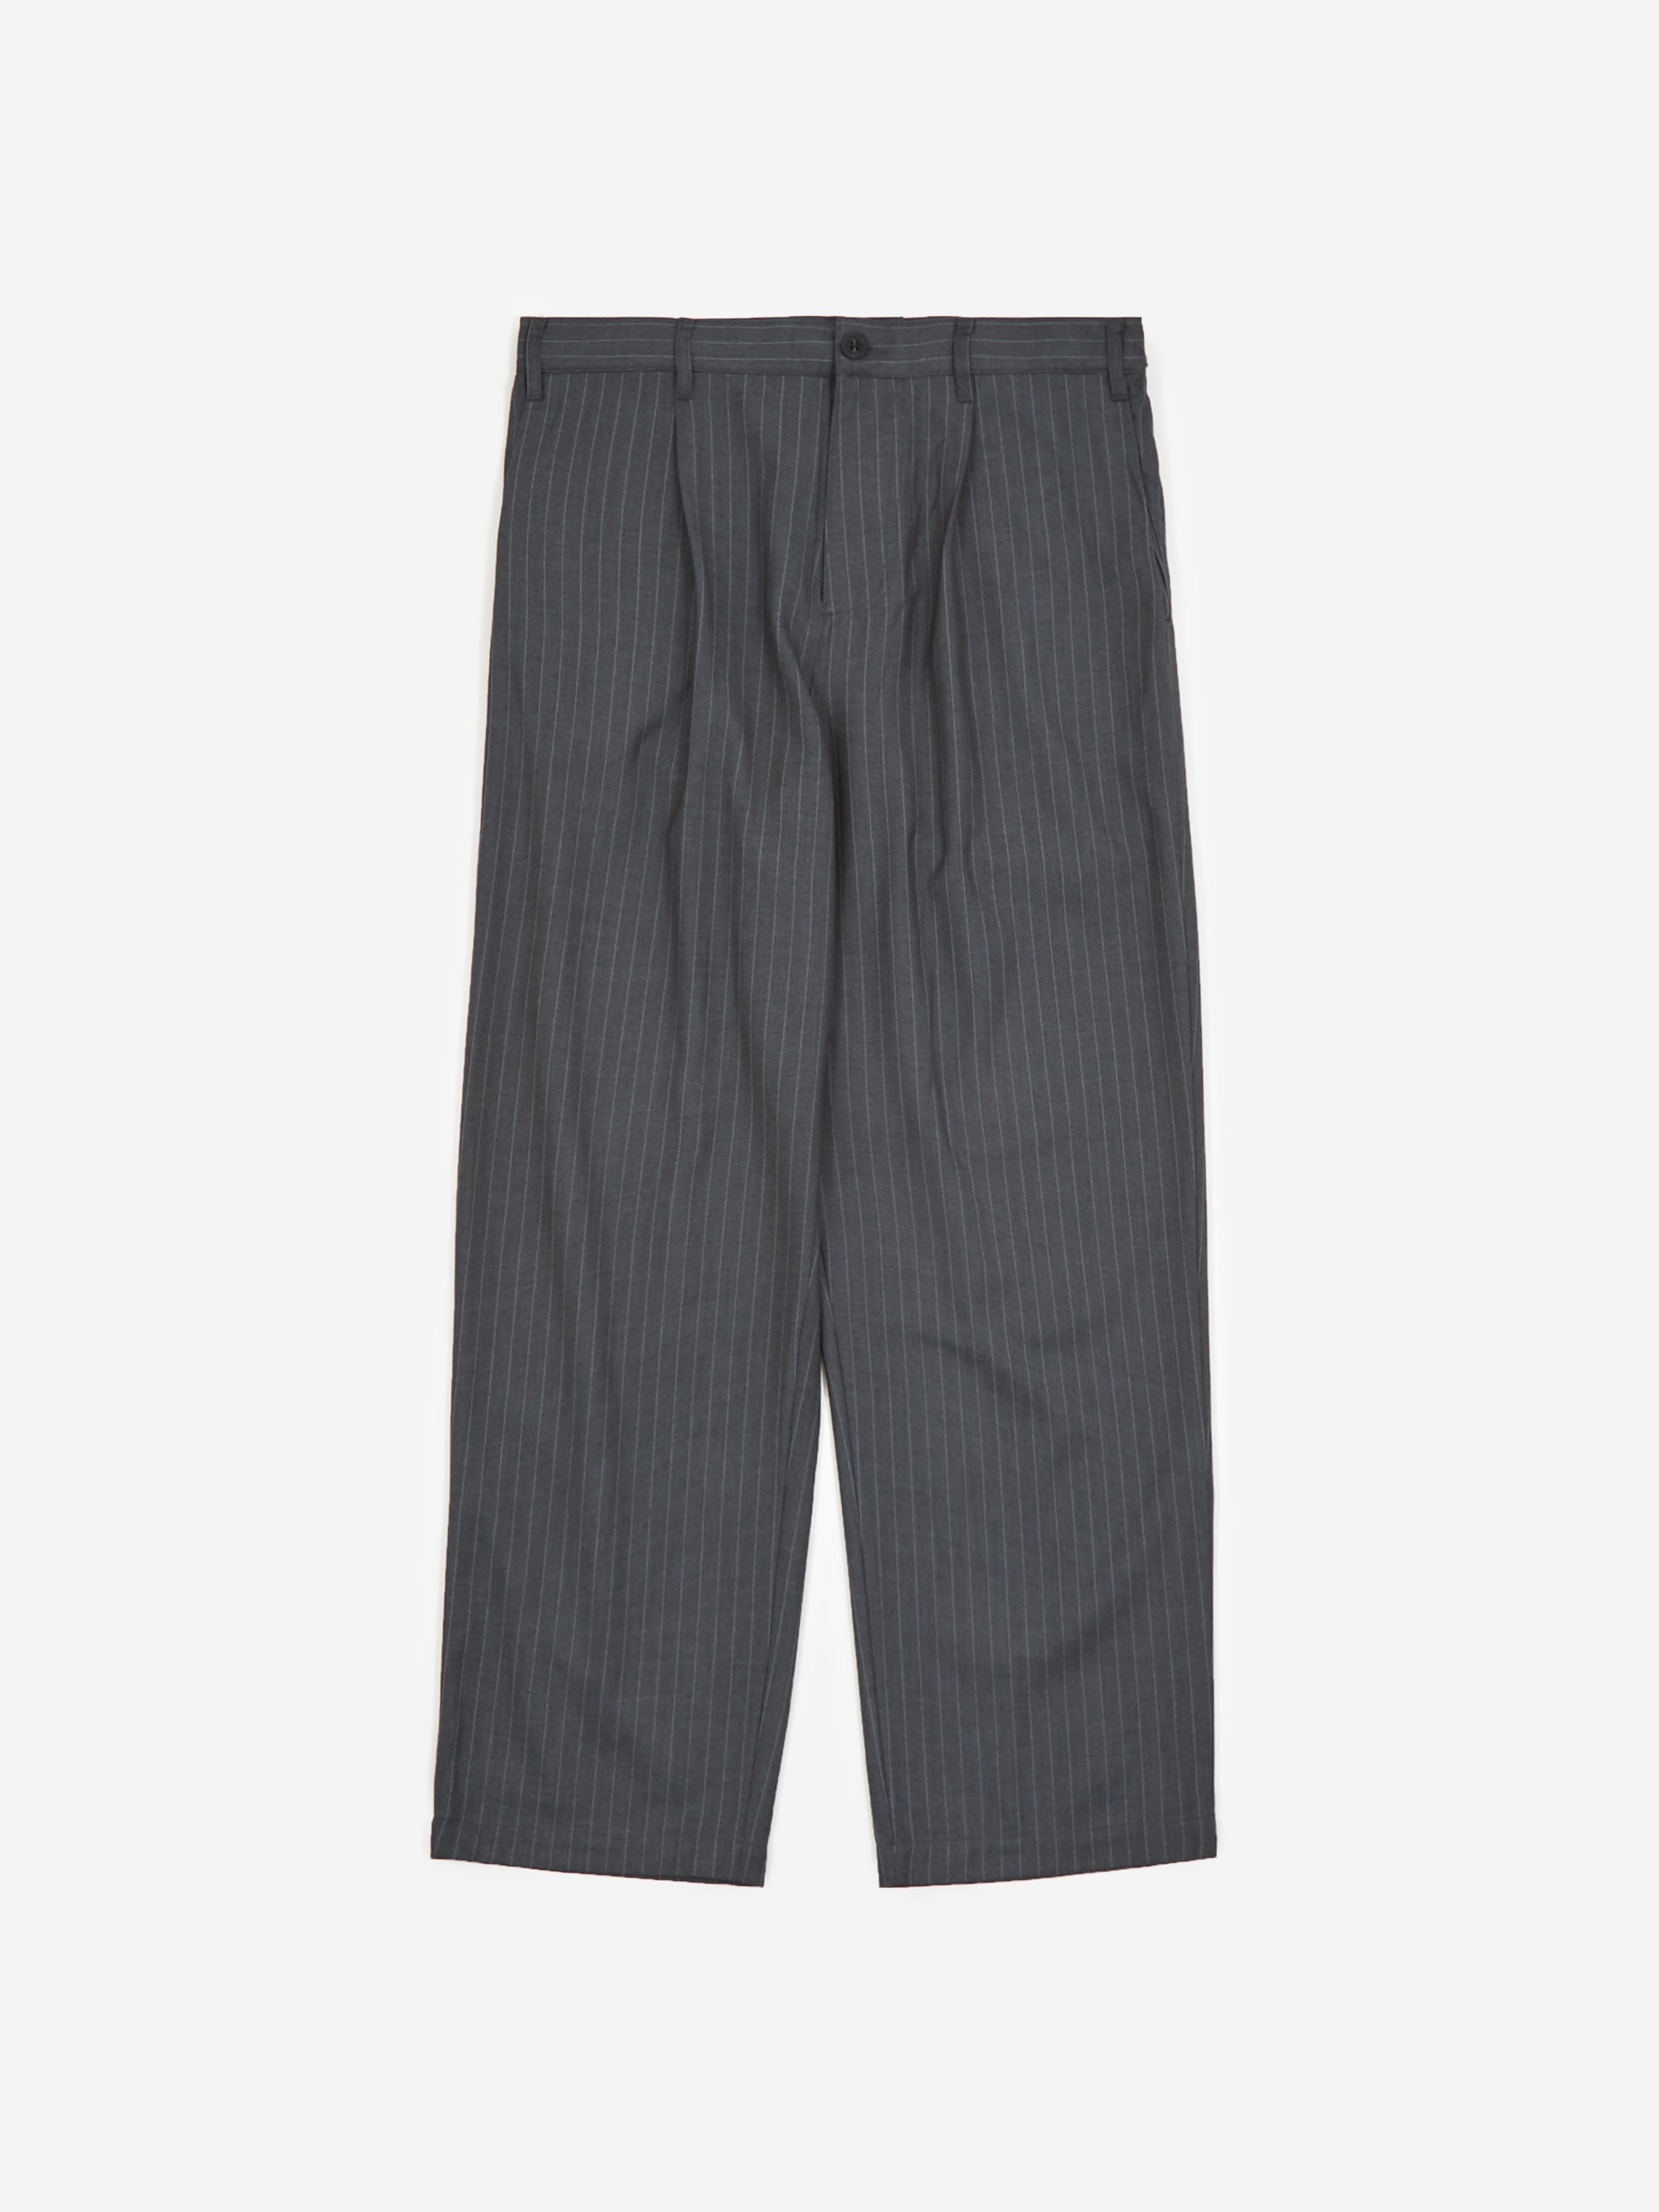 Stussy Striped Volume Pleated Trouser - Grey